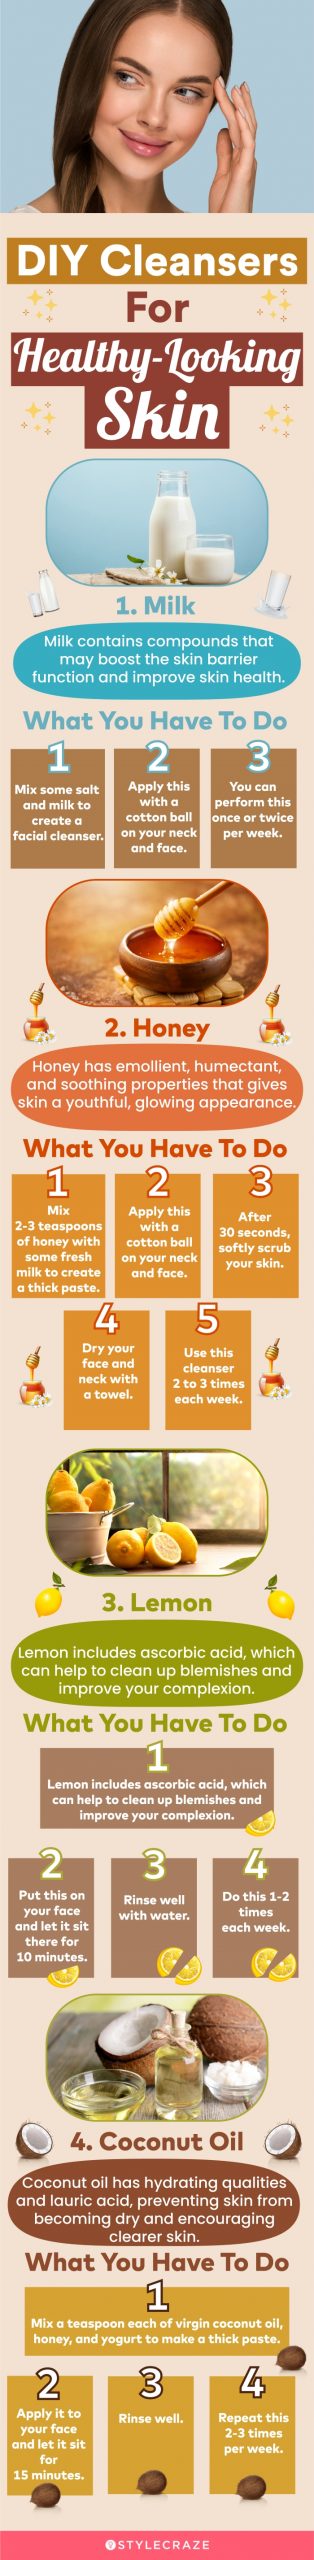 diy cleansers for healthy looking skin [infographic]